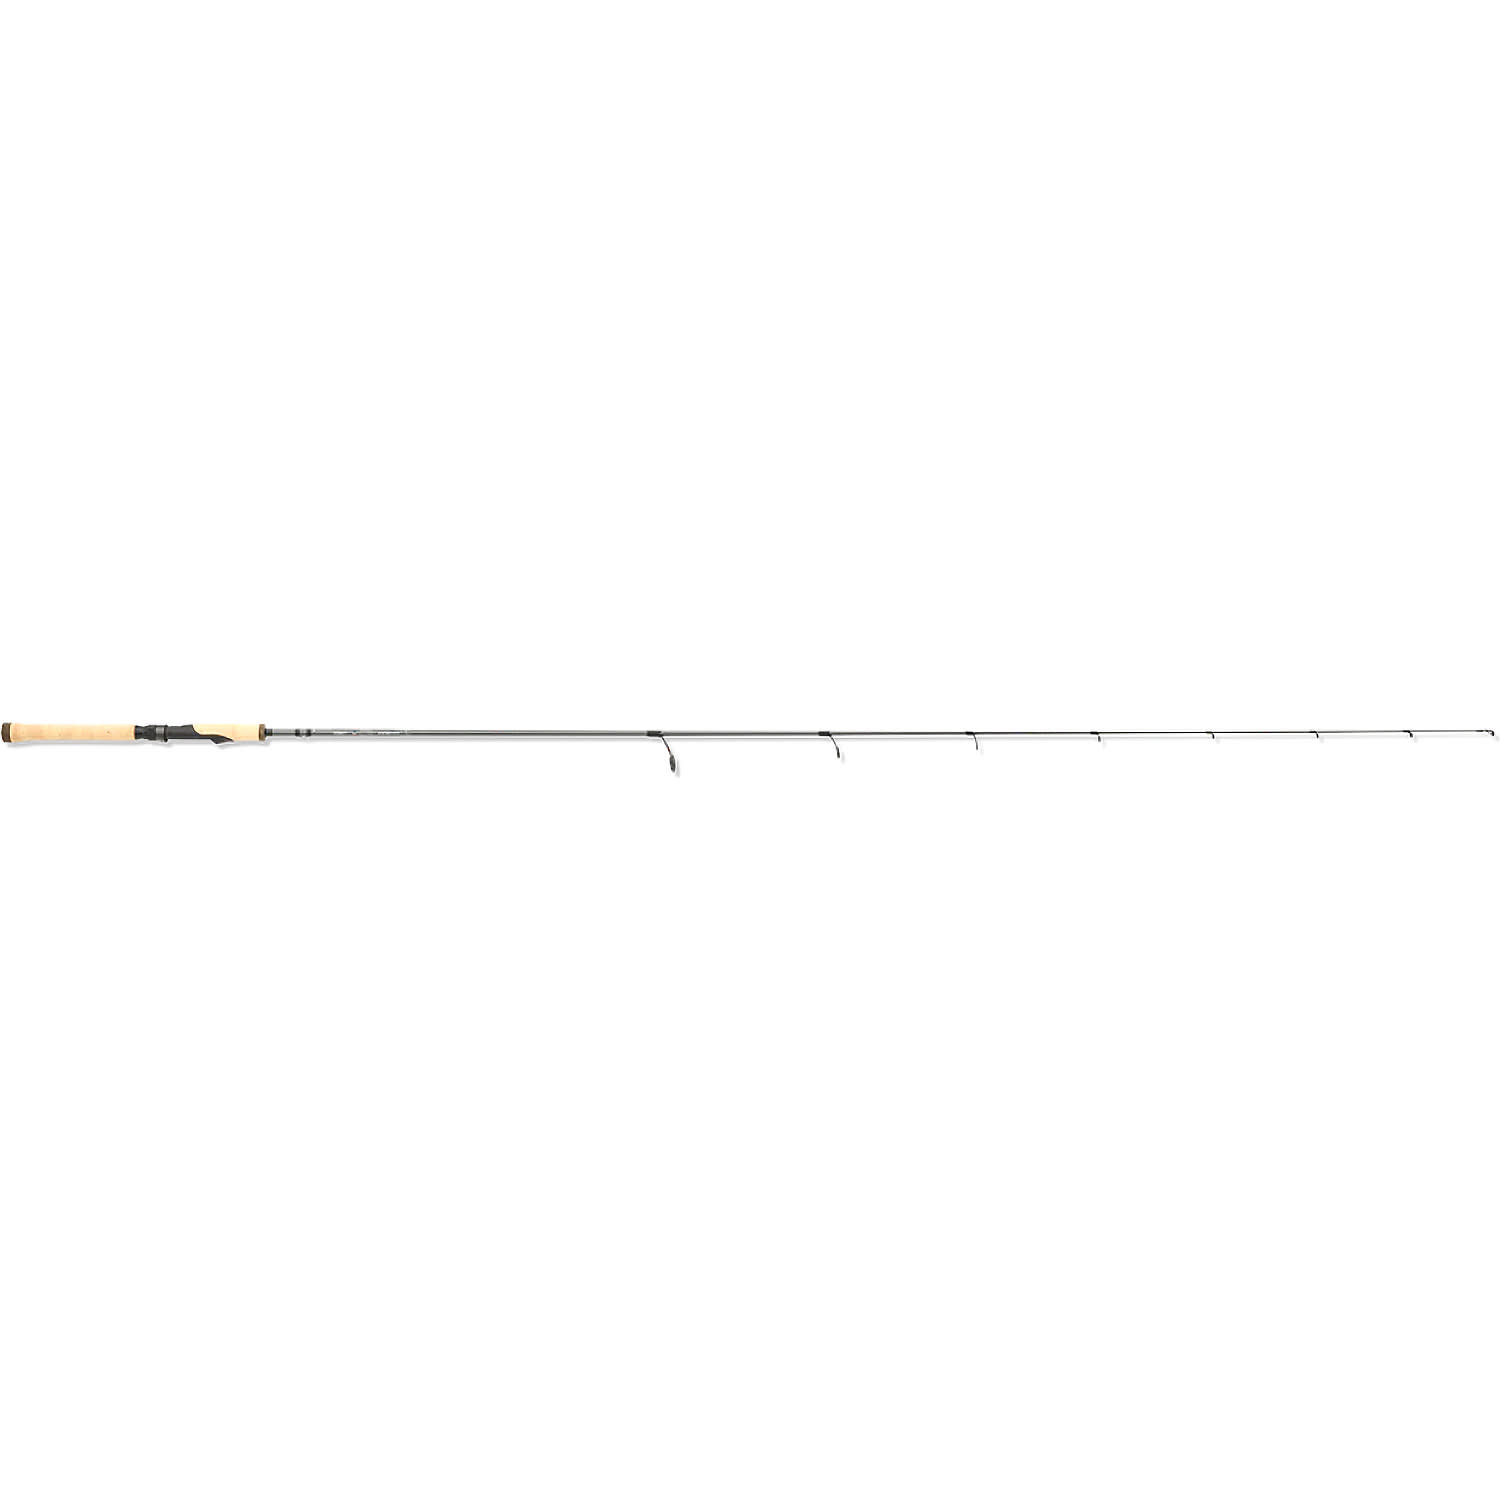 St. Croix Avid Freshwater Spinning Rod ASFS66MF2